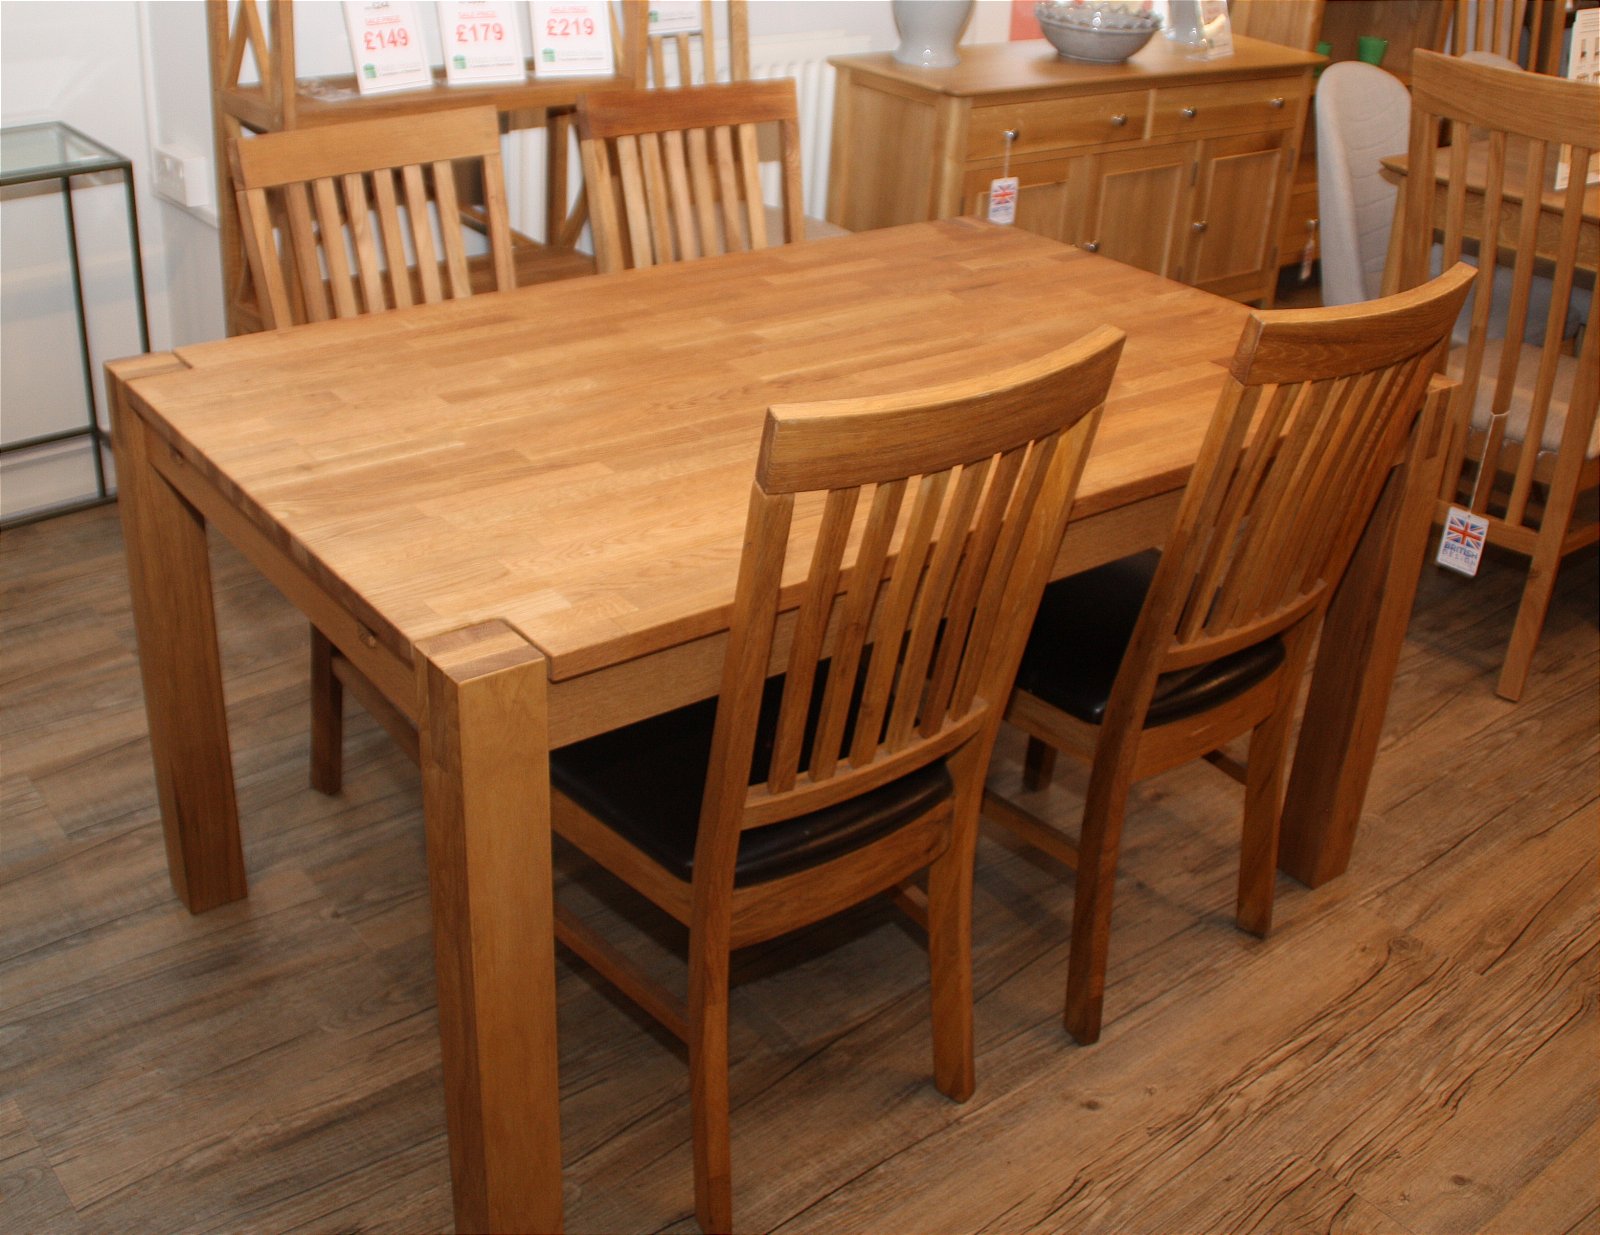 Oak Dining Room Table For Sale